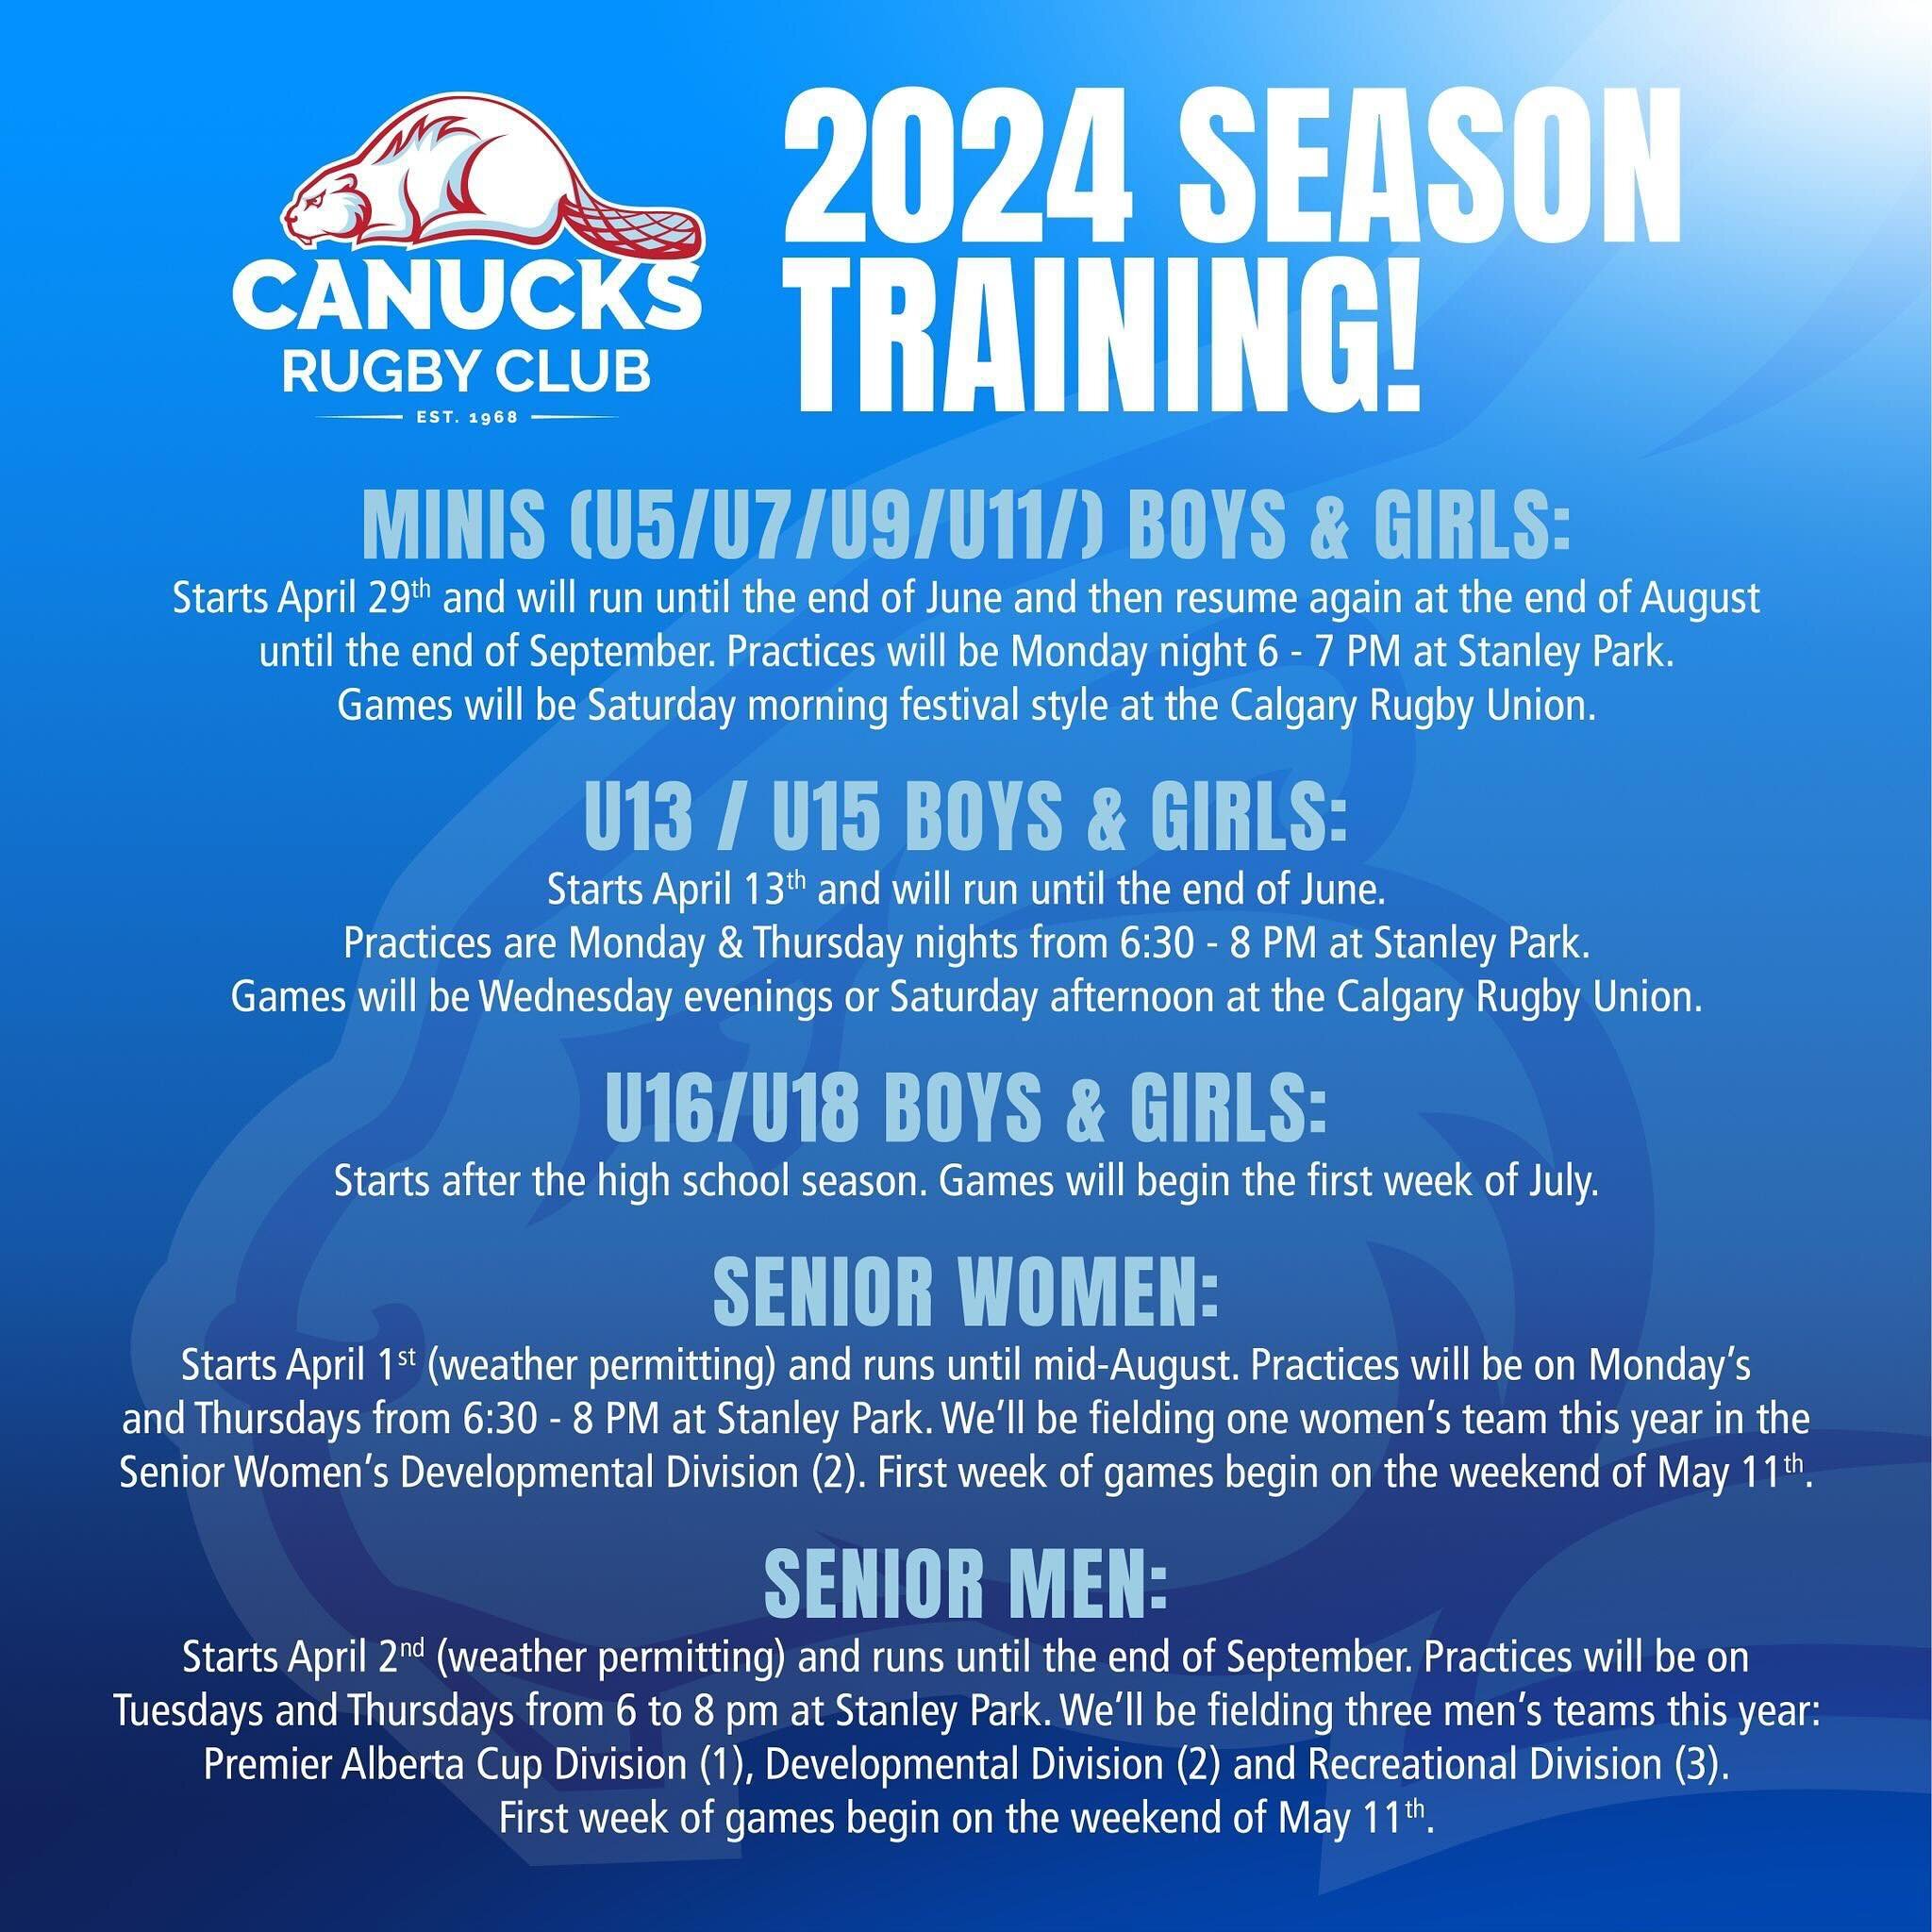 While there&rsquo;s still snow on the ground, the 2024 rugby season is almost here! See our preliminary outdoor start dates and important info for our various teams! 

Join us this season for fun, competitive or social rugby. We have a spot for every